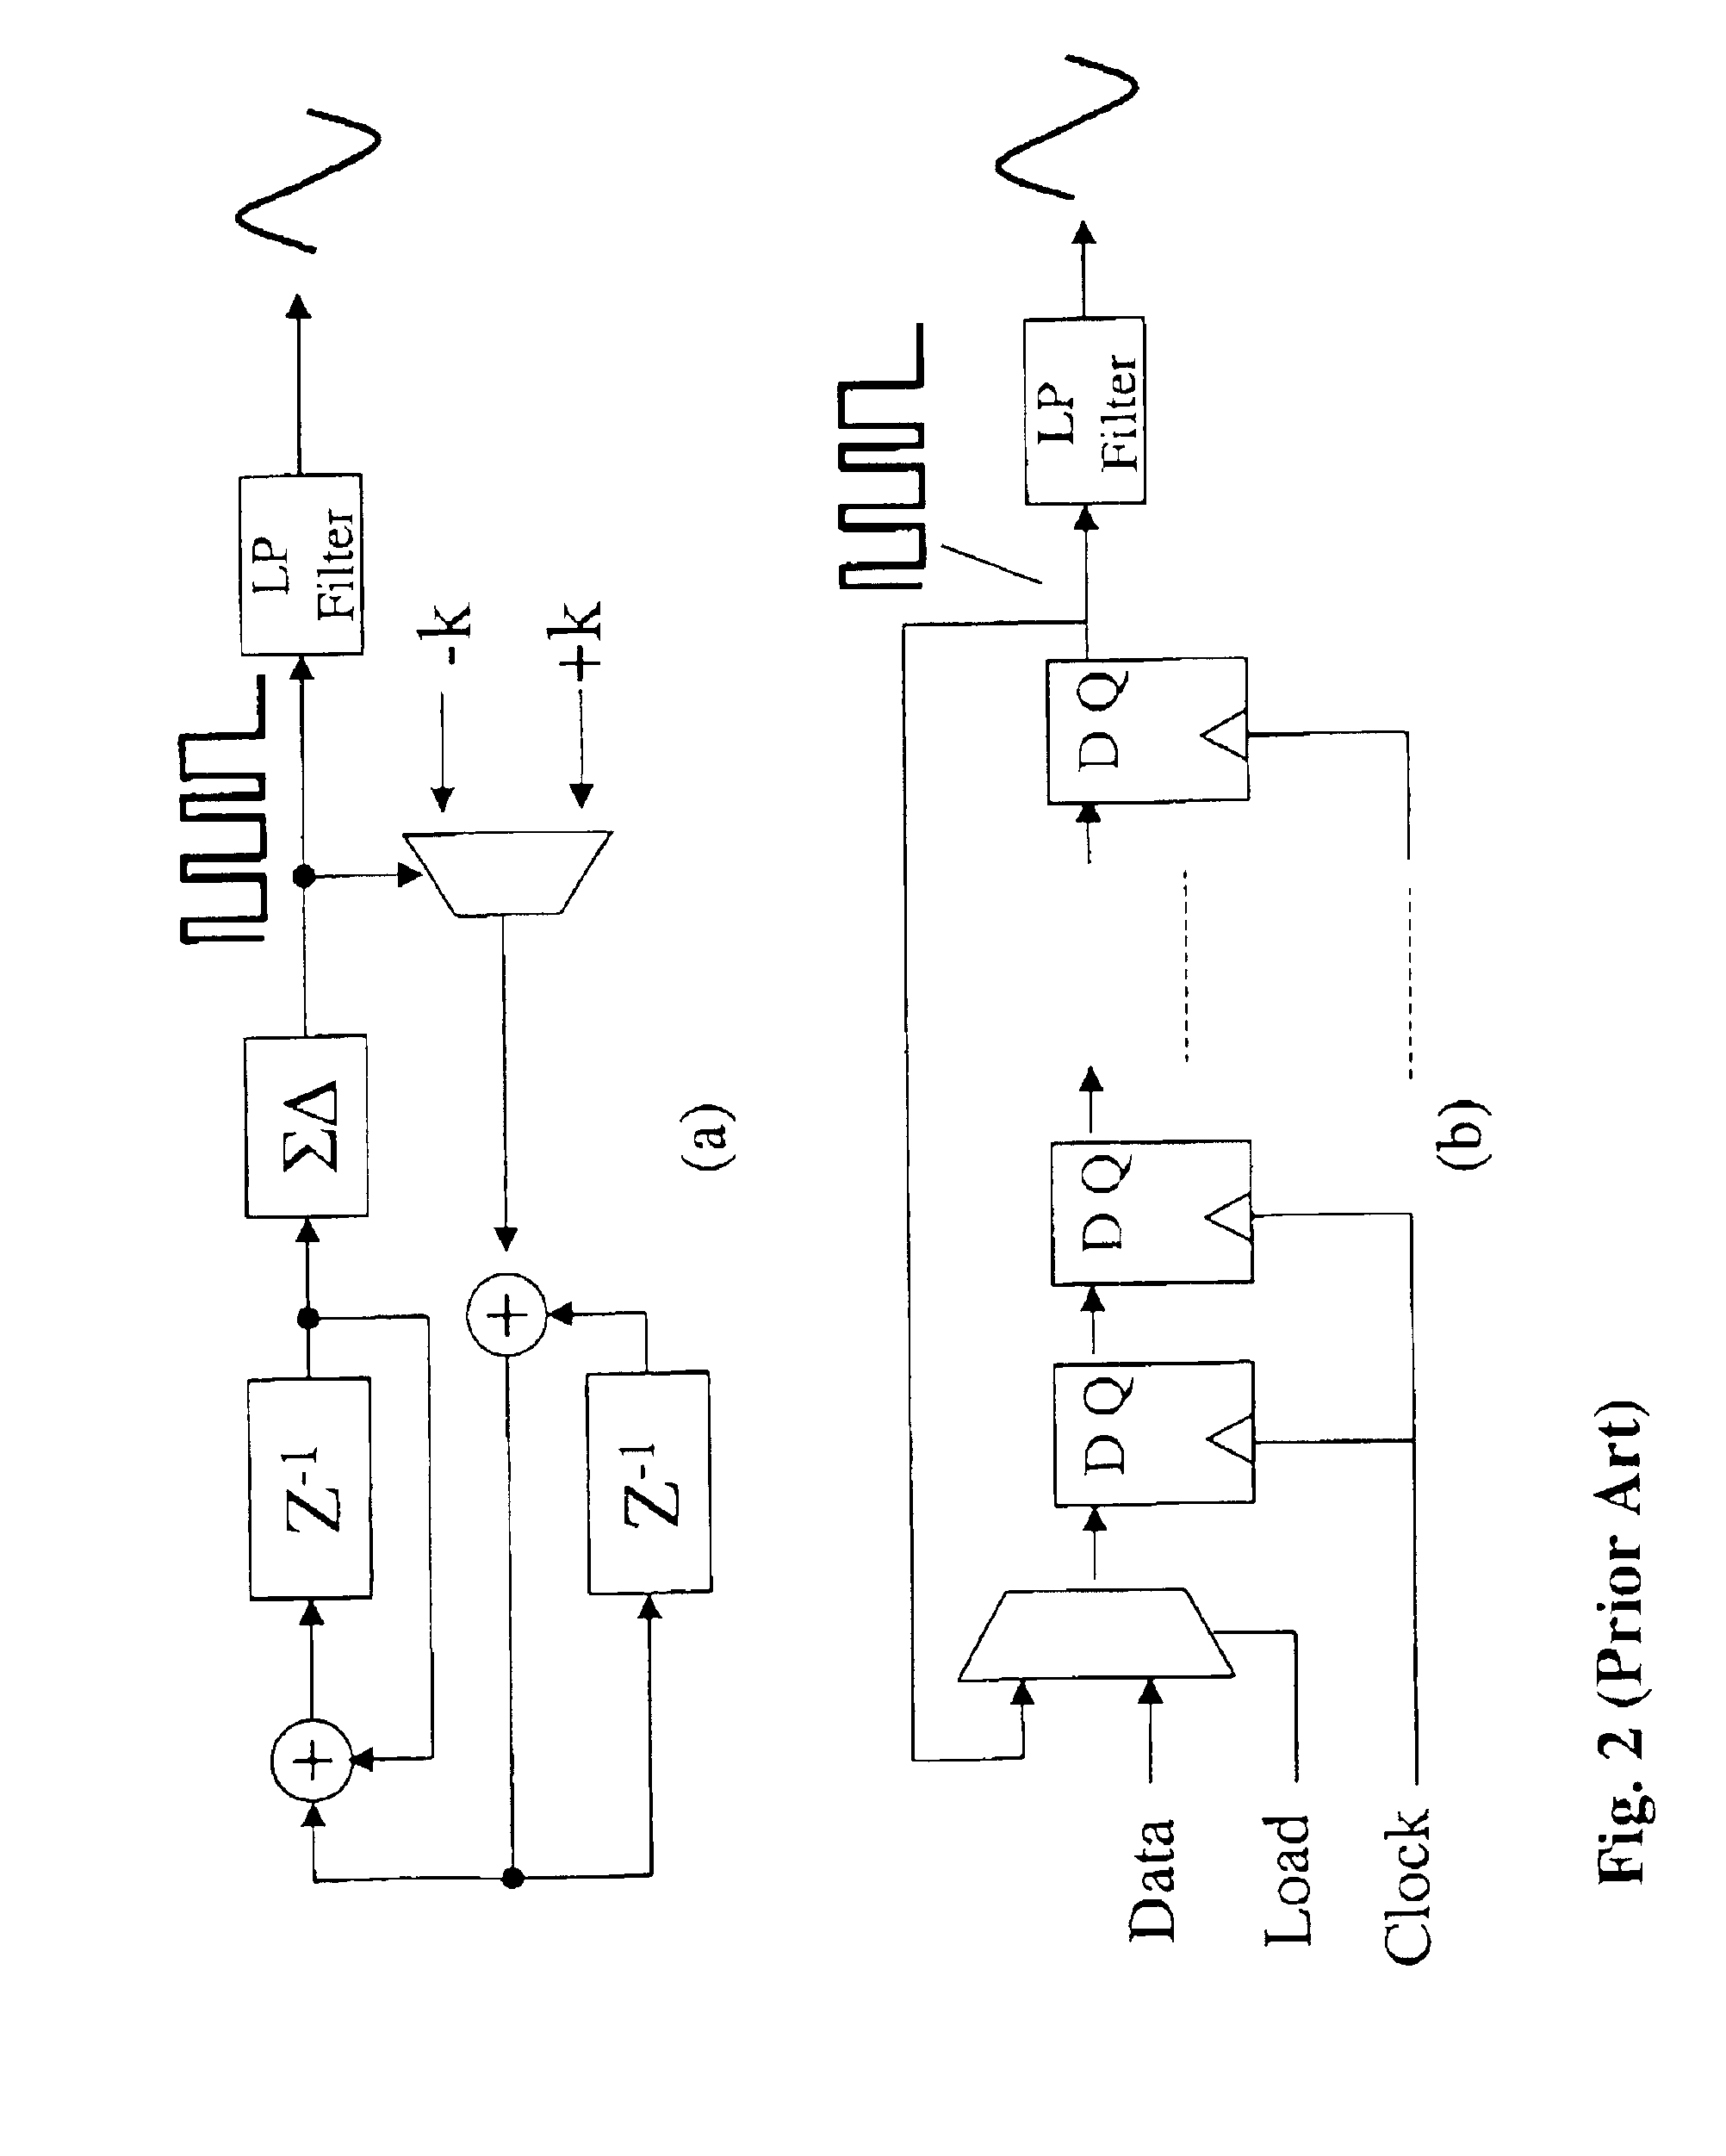 Integrated excitation/extraction system for test and measurement